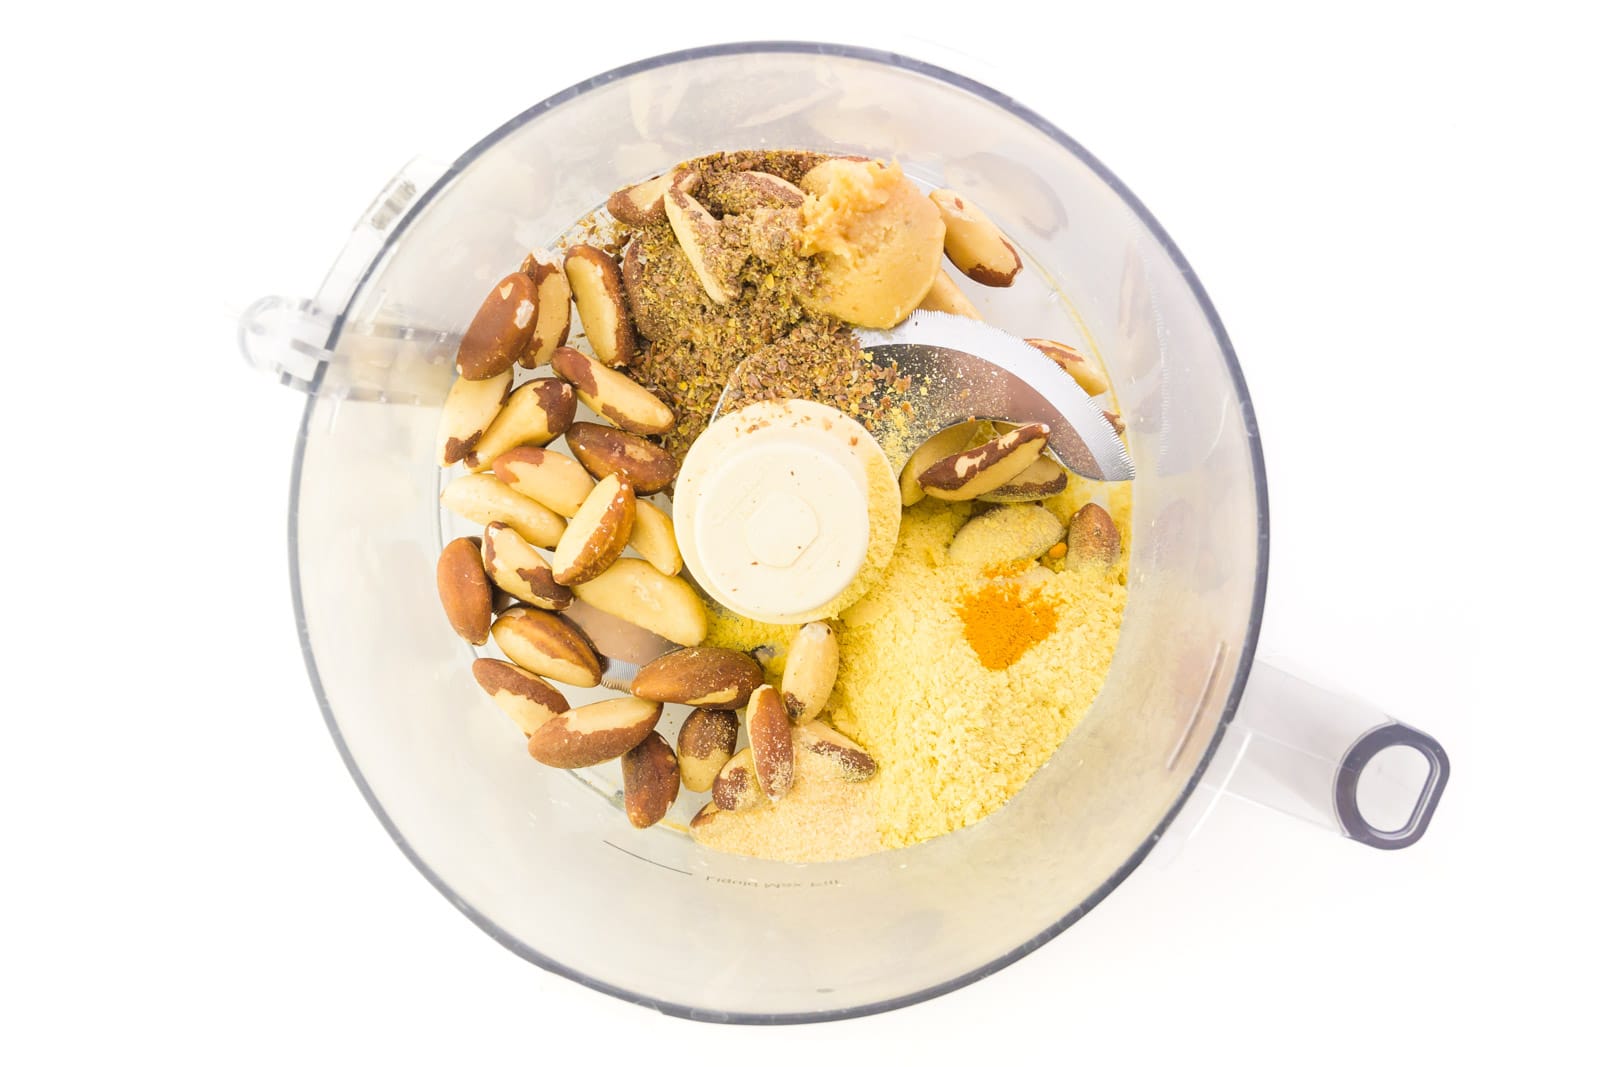 Brazil nuts and other ingredients are in a food processor.